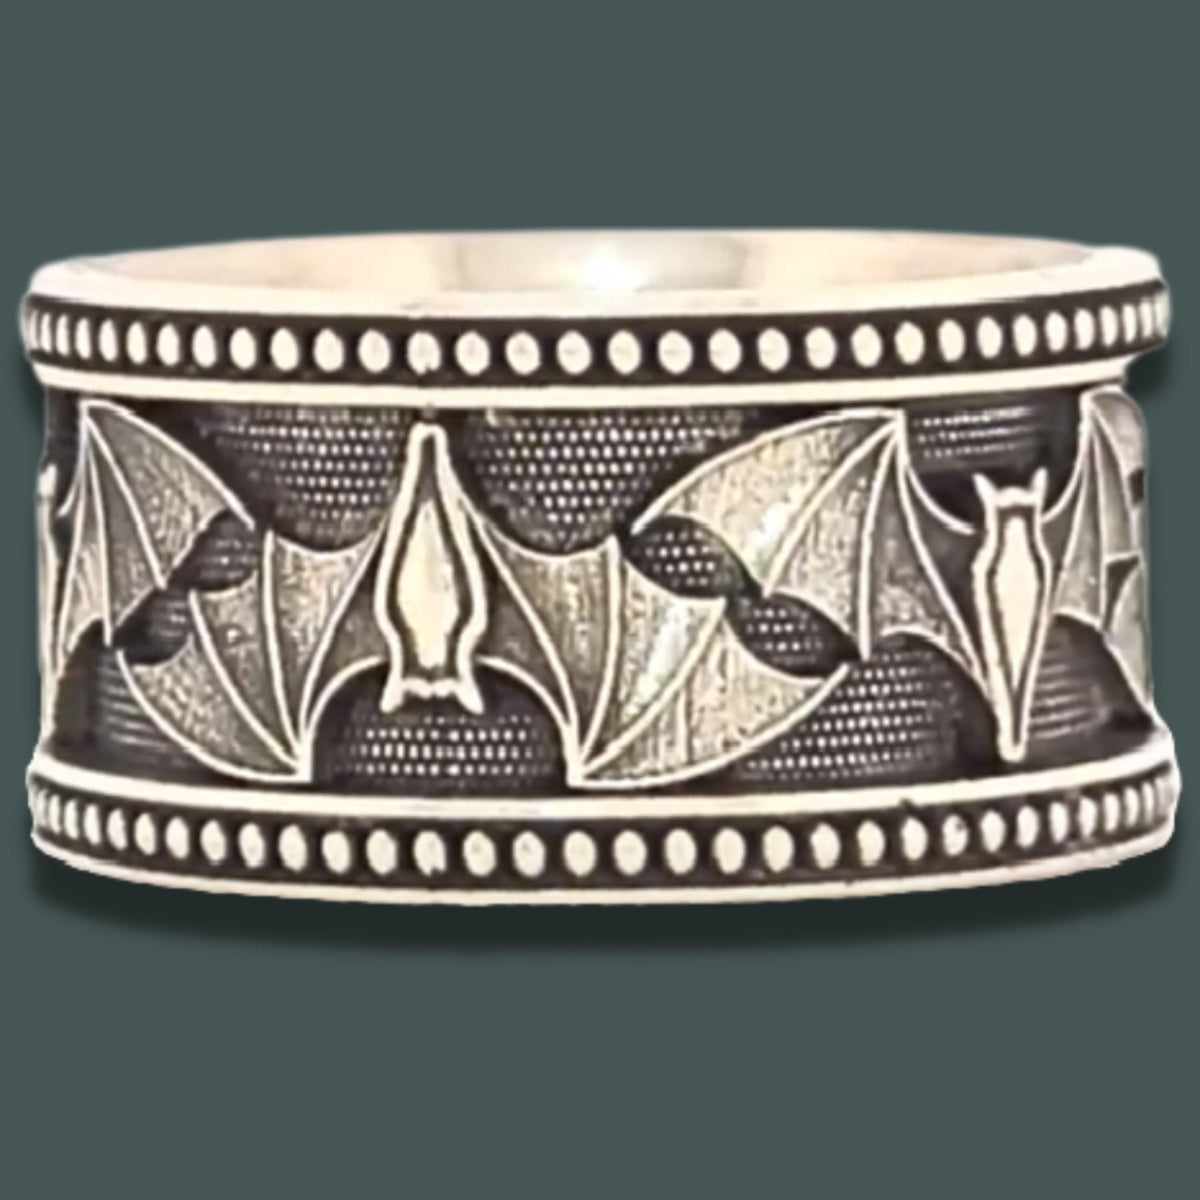 BAT WIDE BEADED Band Ring - Starting at $184 - Celtic Jewelscapes